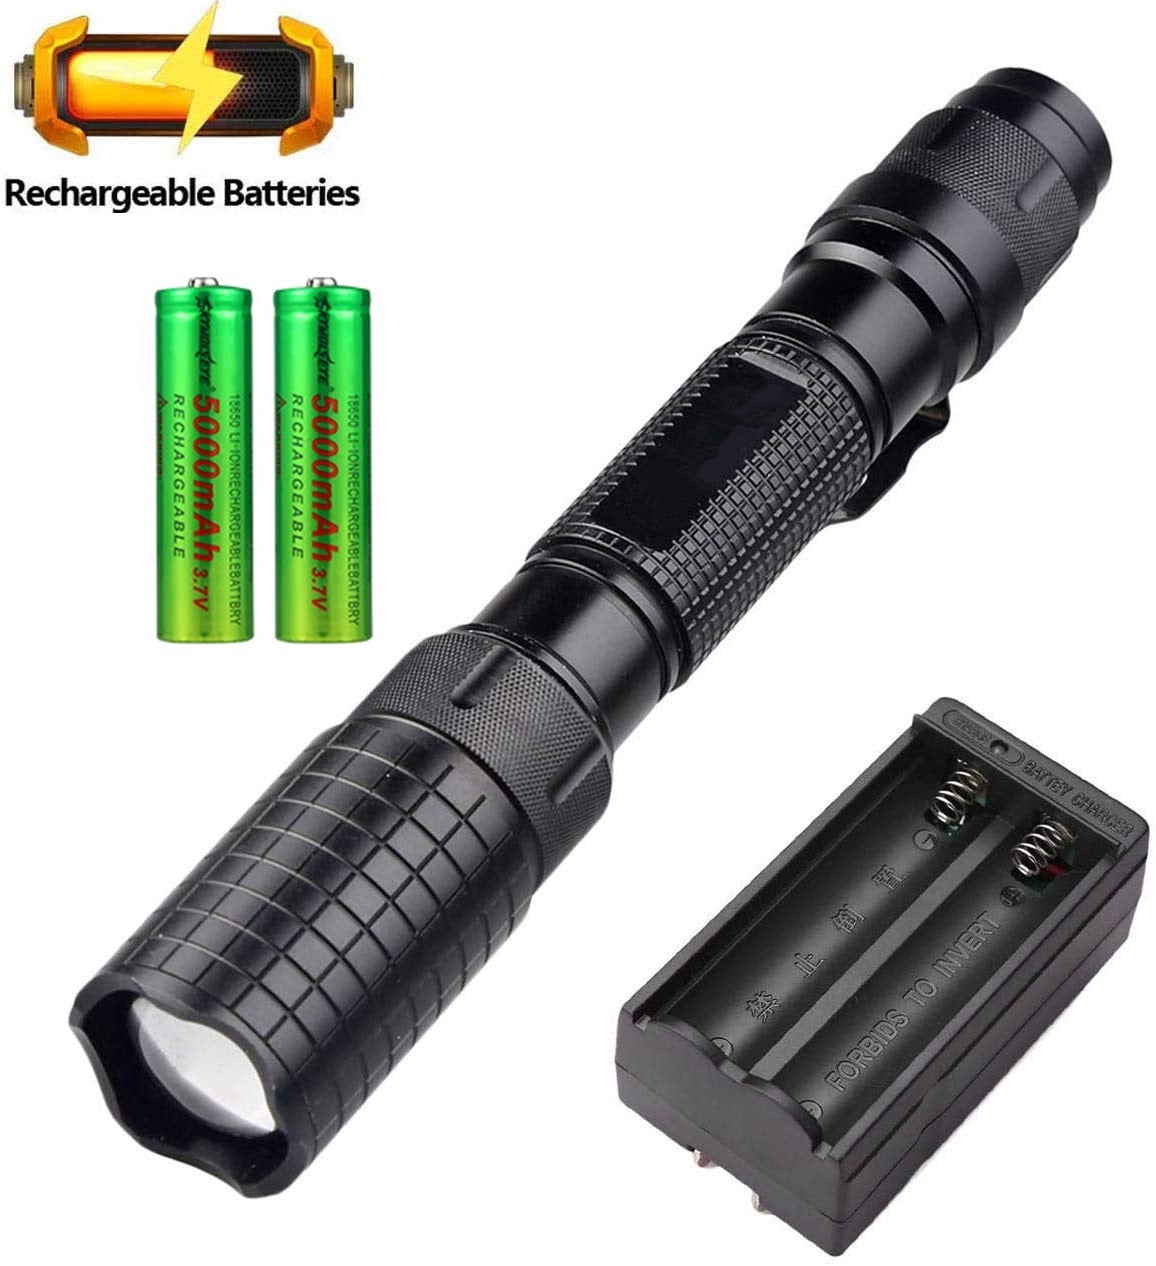 Torch LED Torch Tactical Military Torches Super Bright Powerful Lumens 